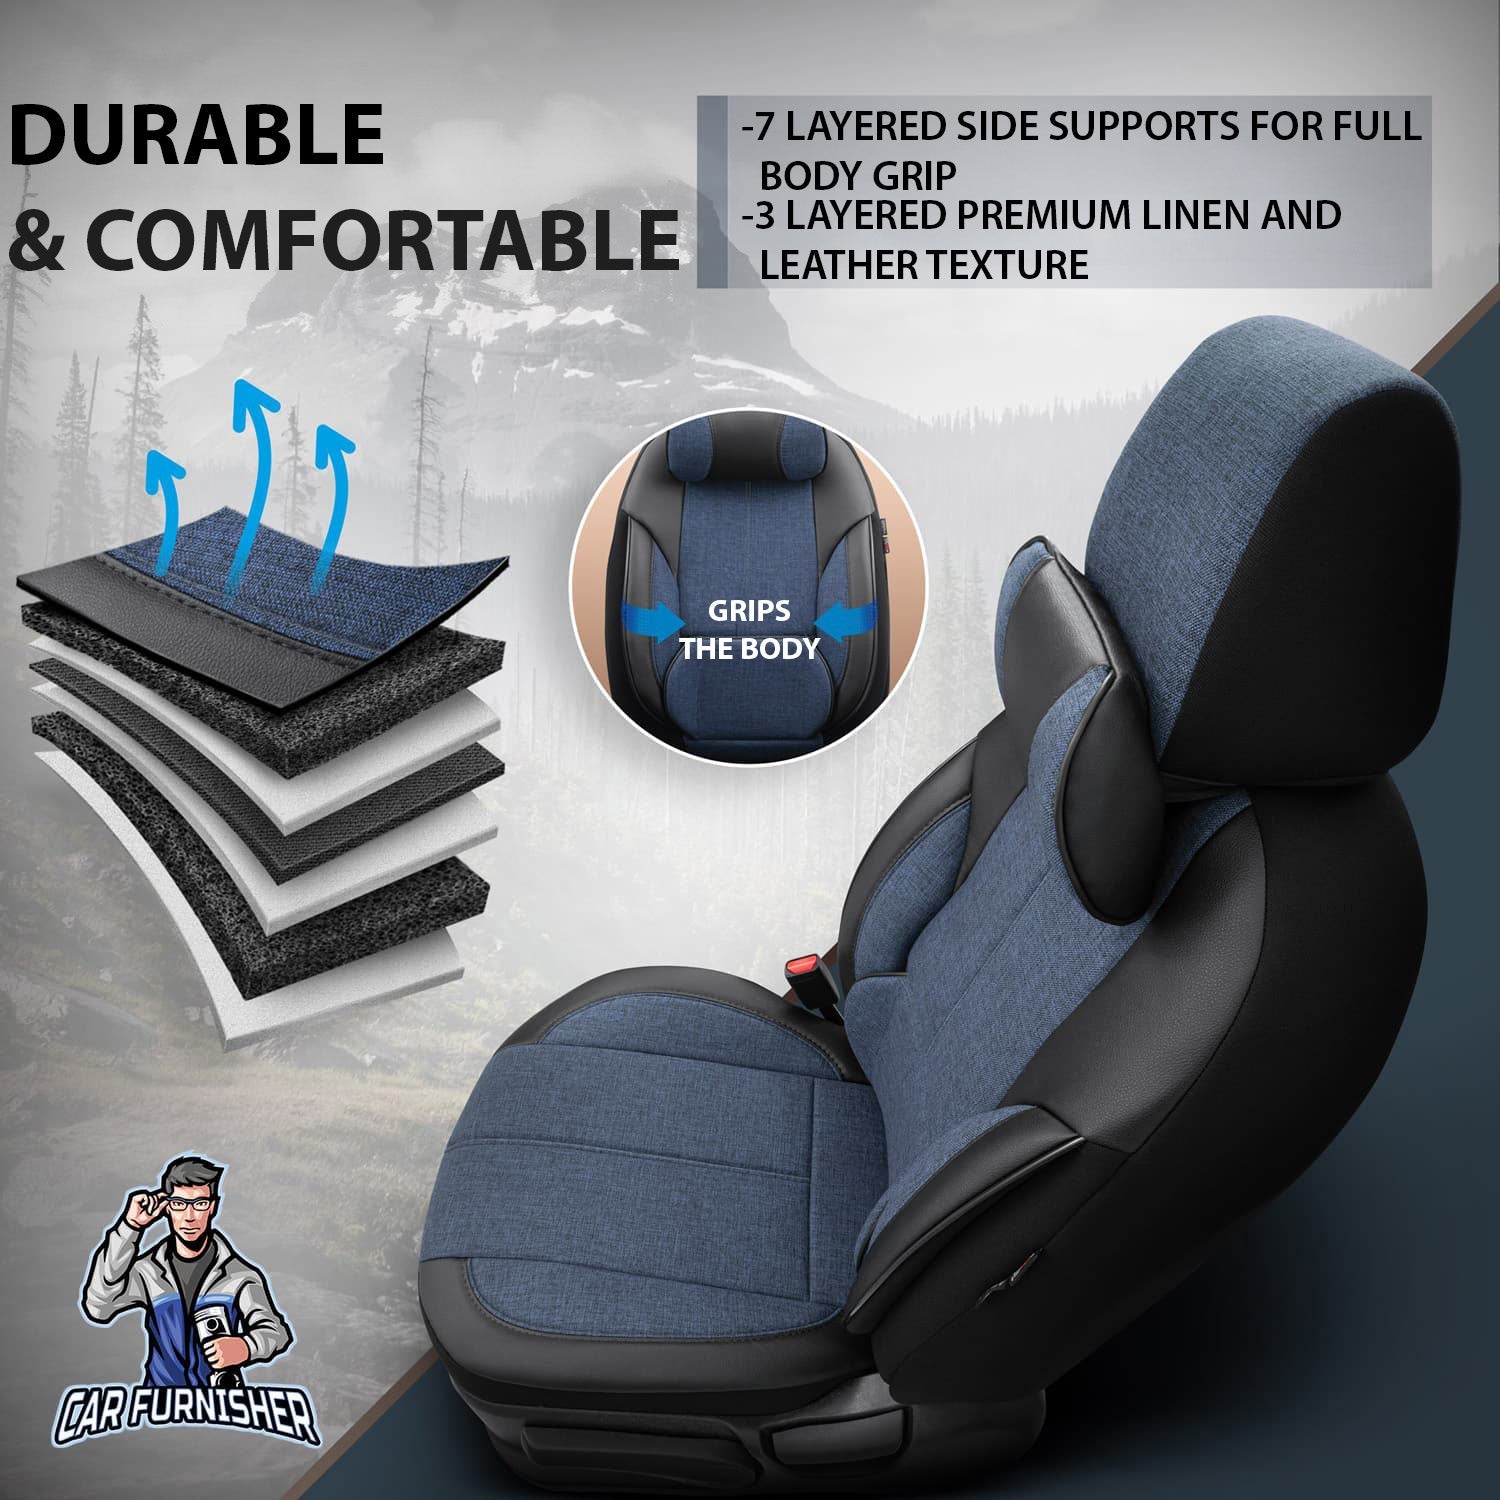 Mercedes 190 Seat Covers Voyager Design Blue 5 Seats + Headrests (Full Set) Leather & Linen Fabric